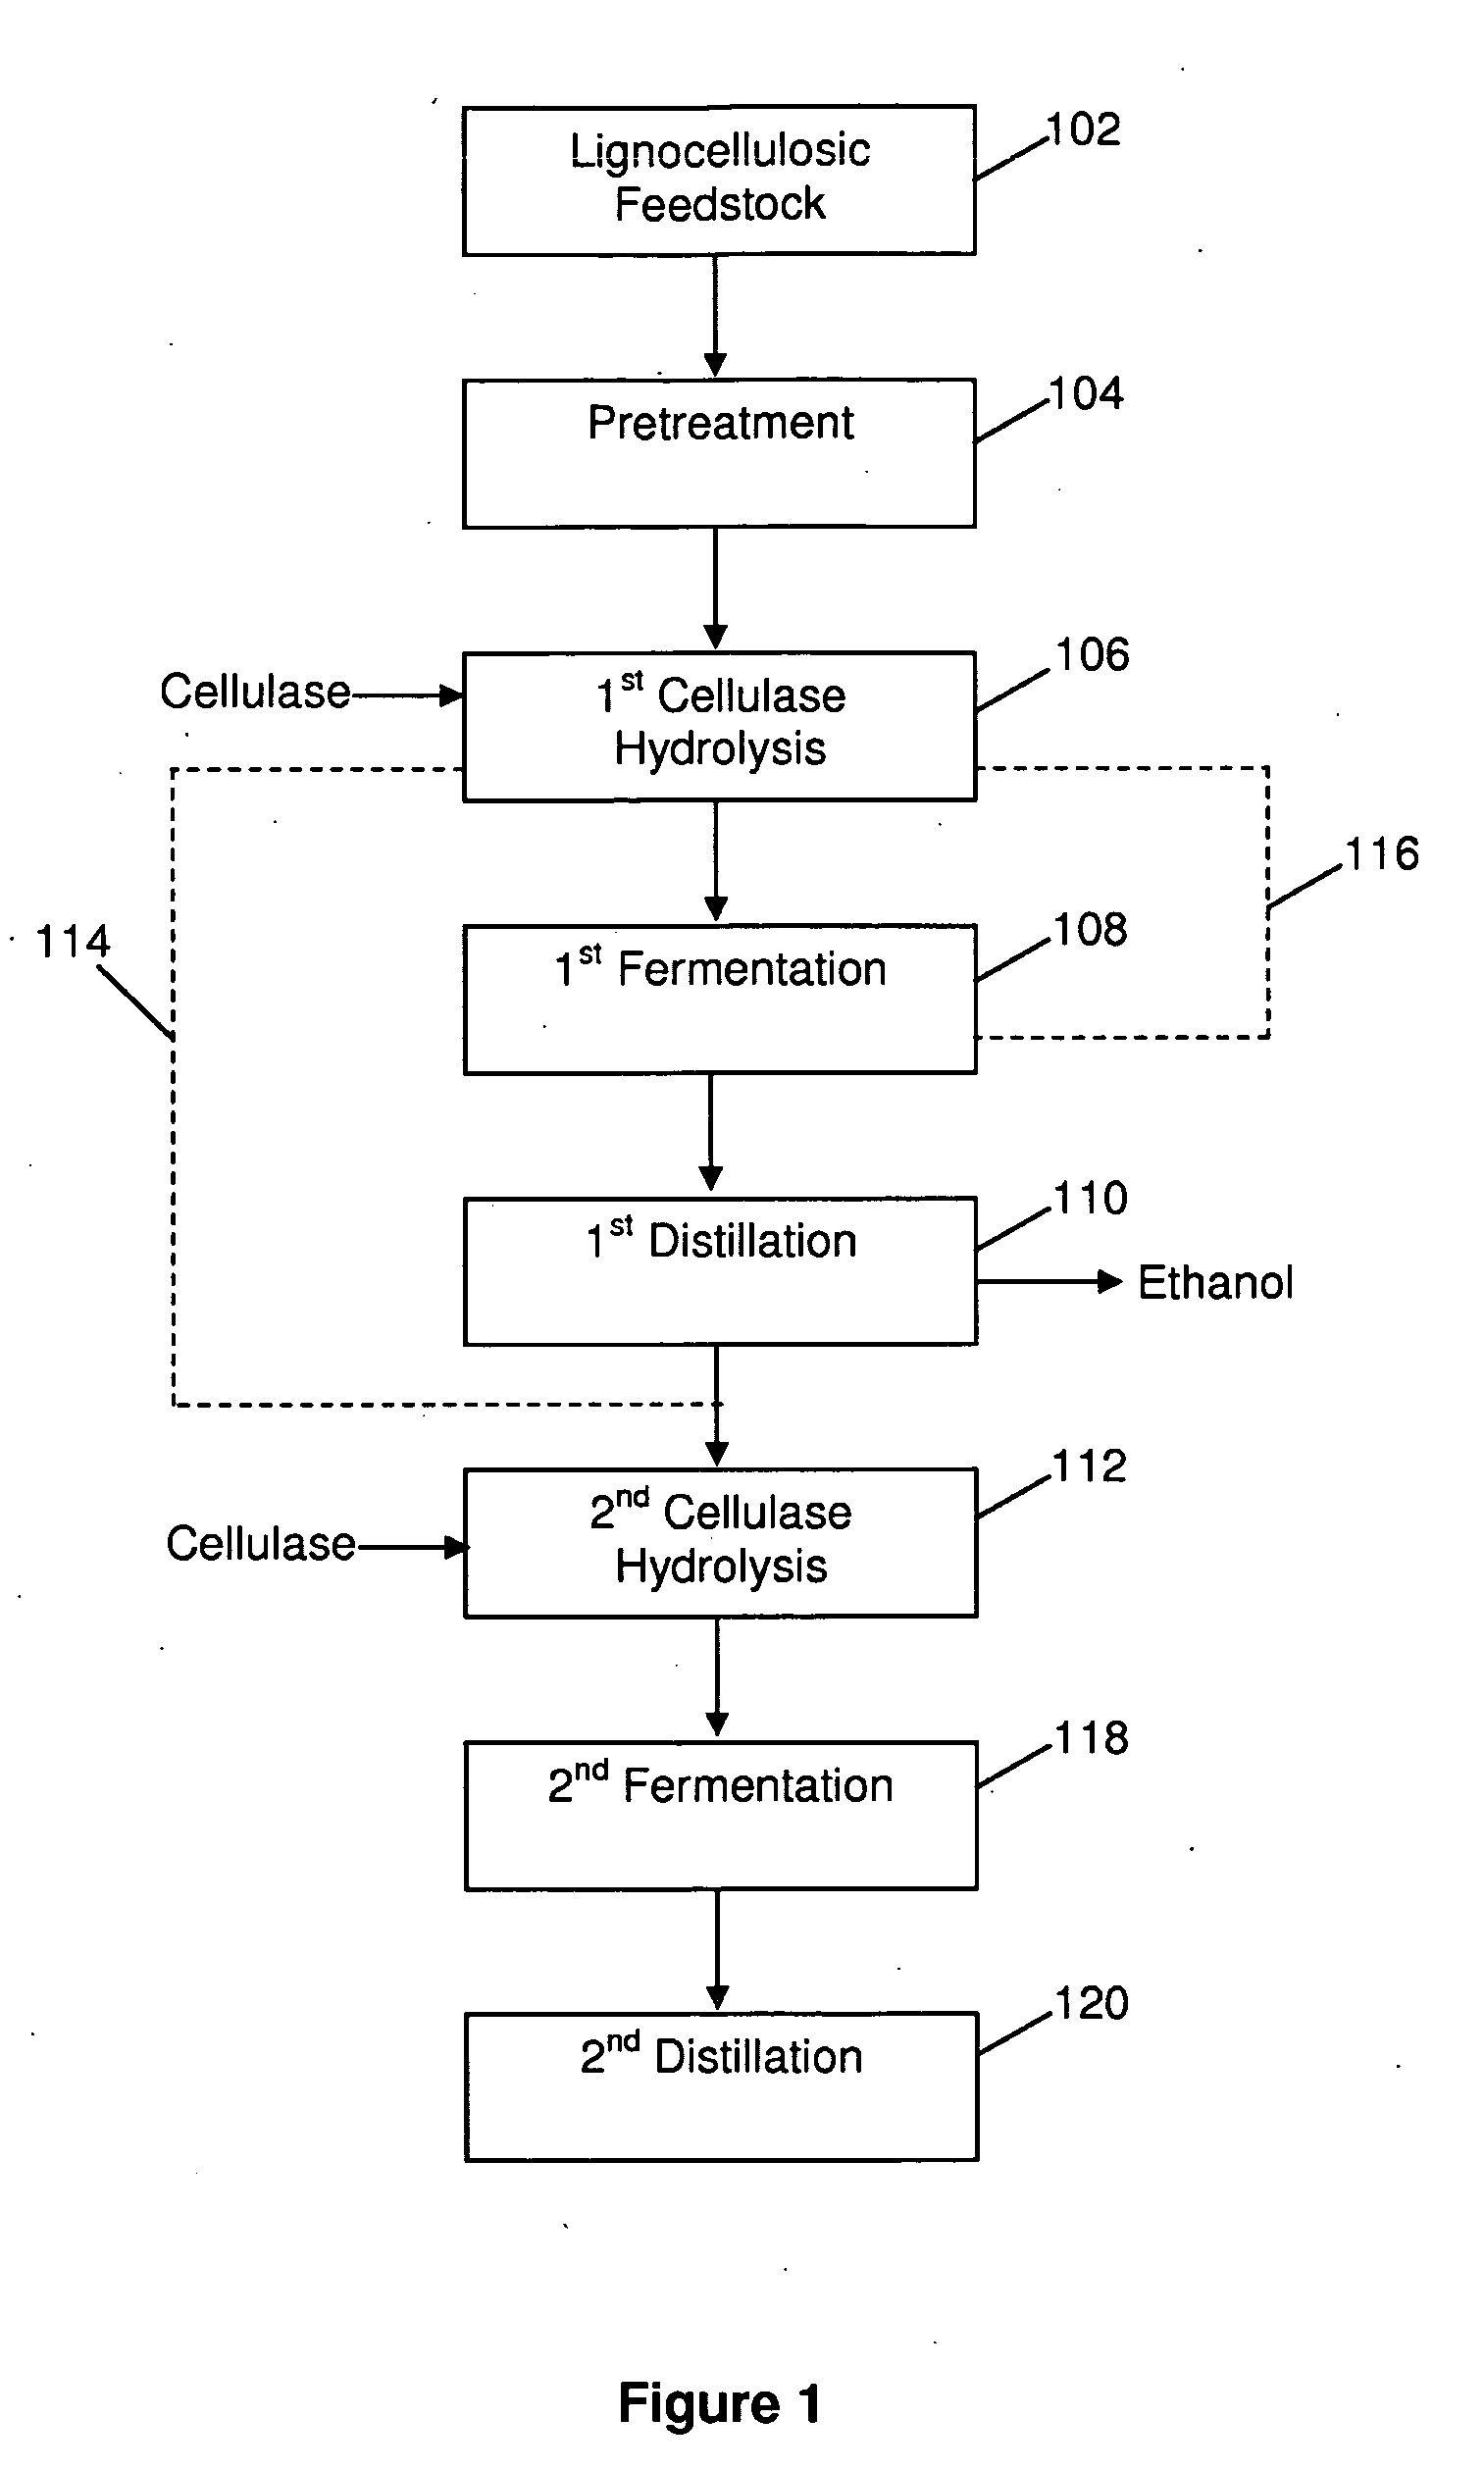 Method for the production of alcohol from a pretreated lignocellulosic feedstock